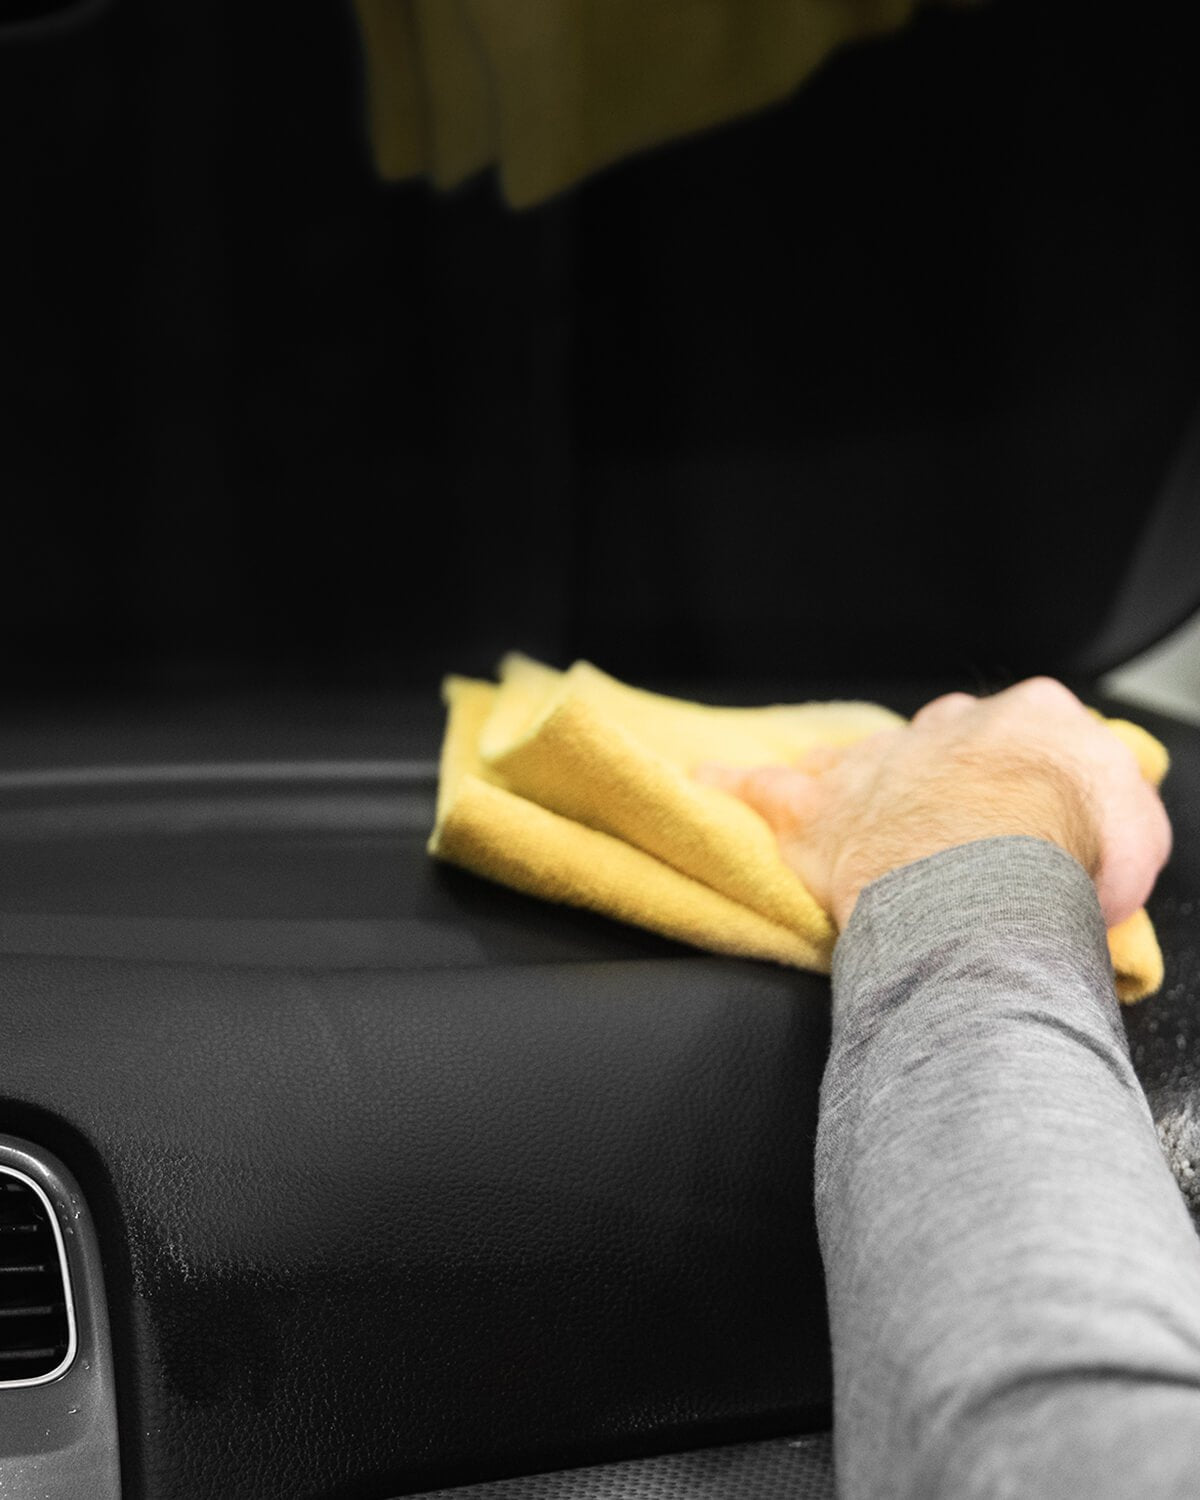 Dashboard Cleaner That Won't Leave A Residue